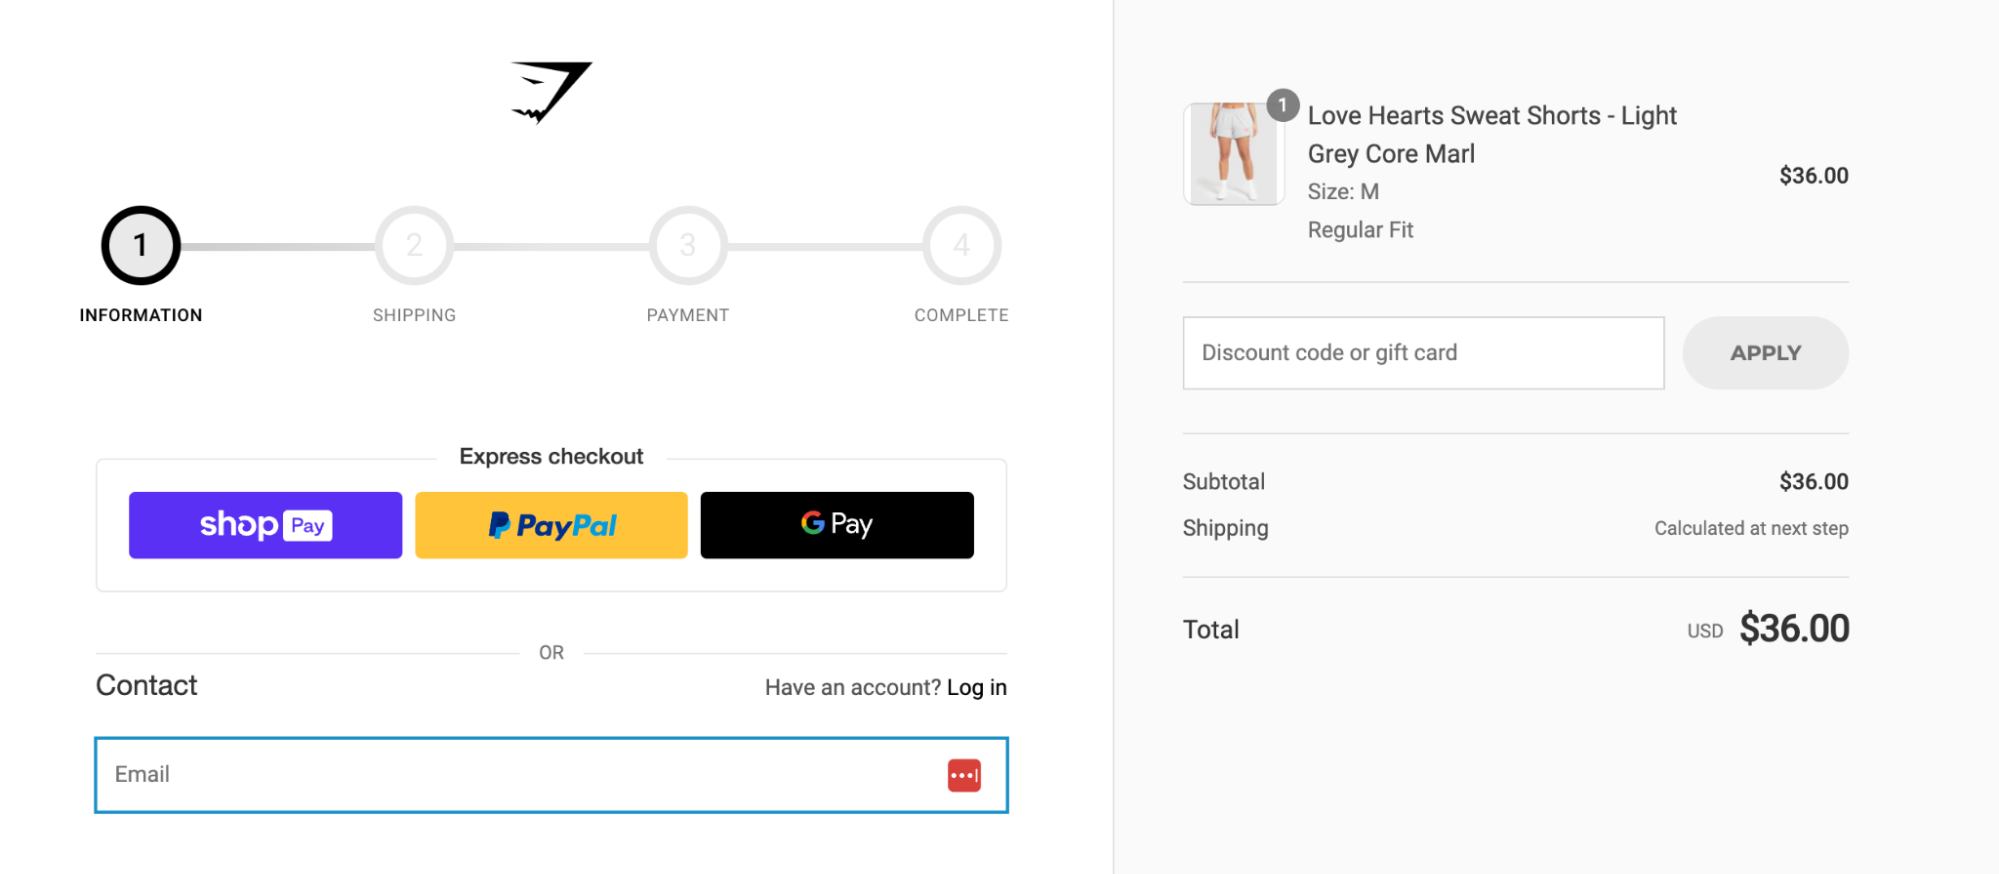 Gymshark’s US online store showing a $36 product in the cart.